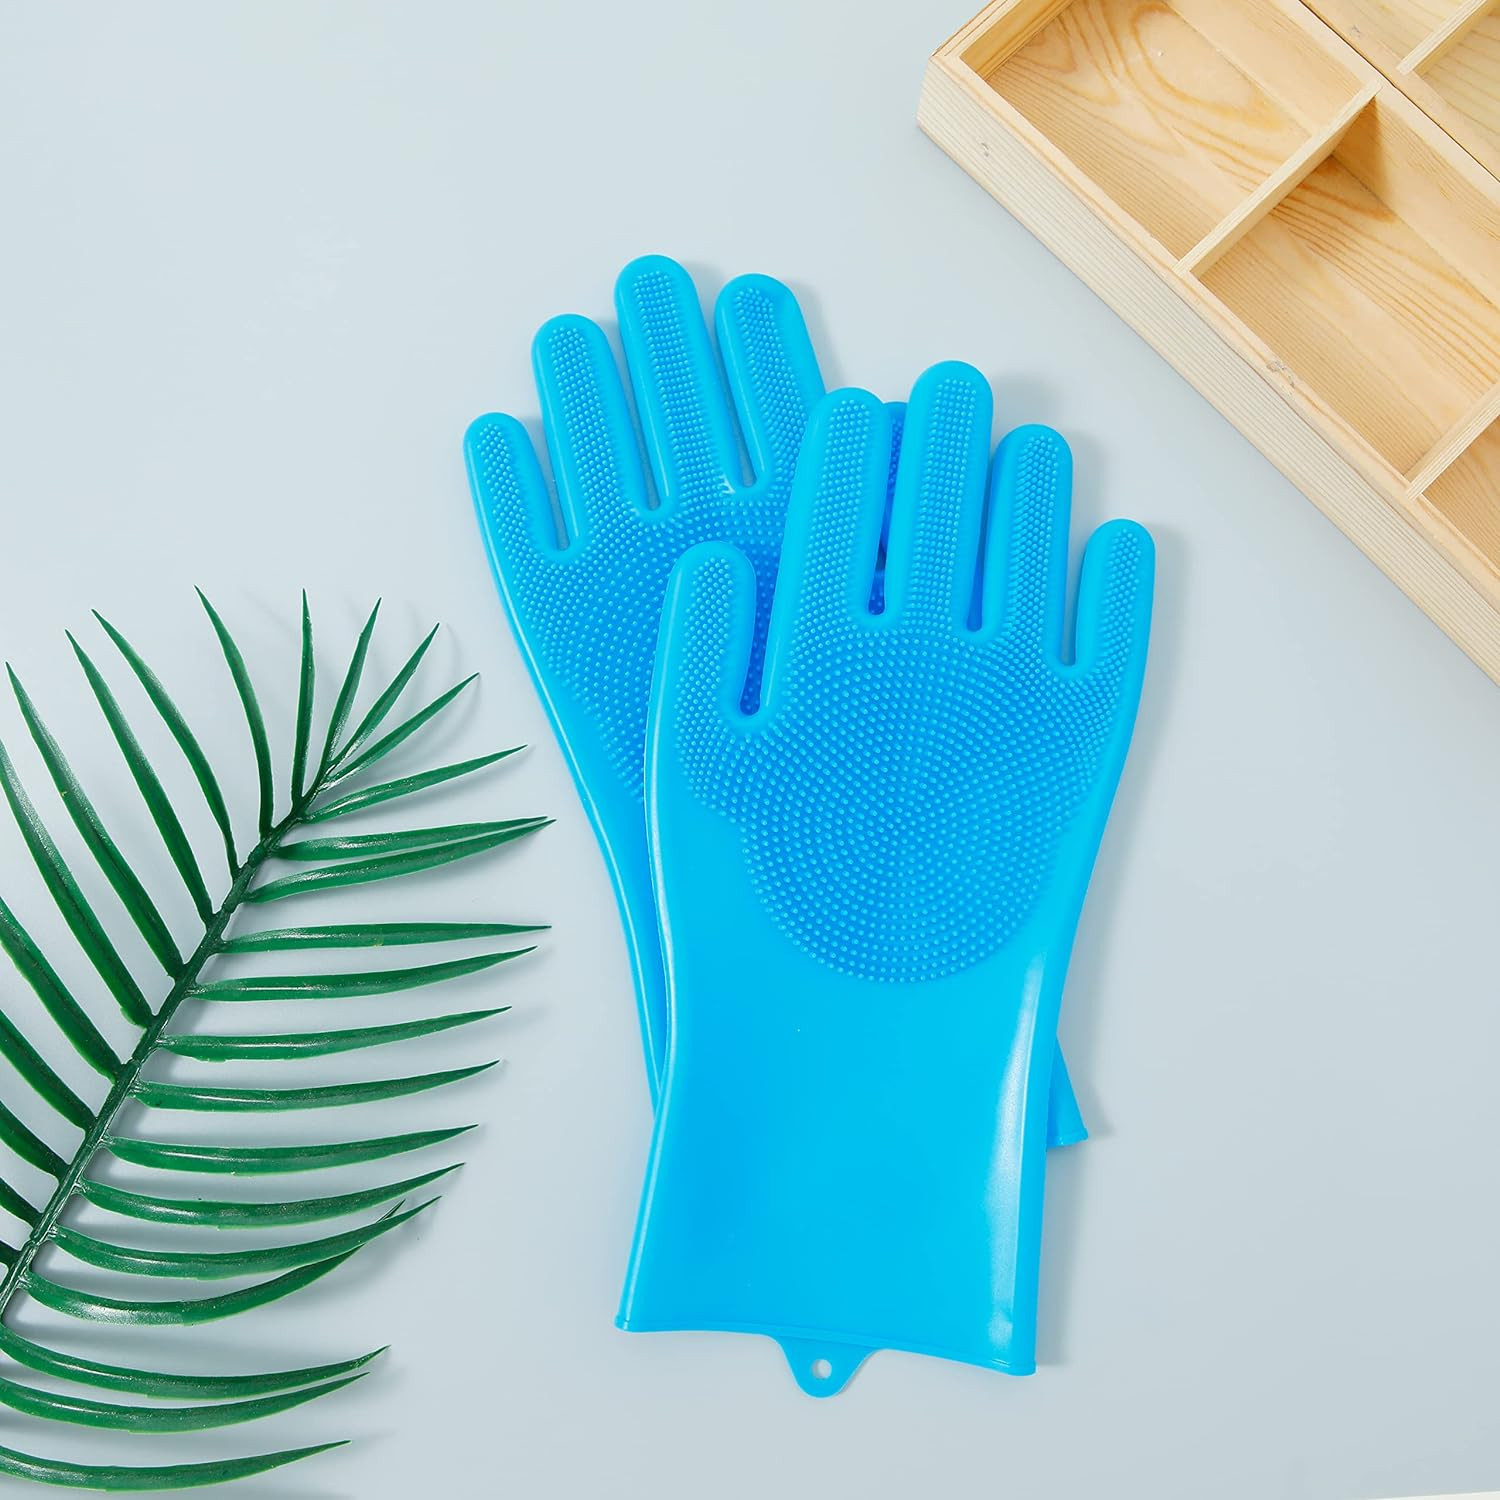 Kuber Industries Multi-Purpose Silicon Gloves | Reusable Gardening Gloves | Heat Resistant for Better Protection | Non-Slippery & Durable | Blue | Versatile and Protective Garden Gloves